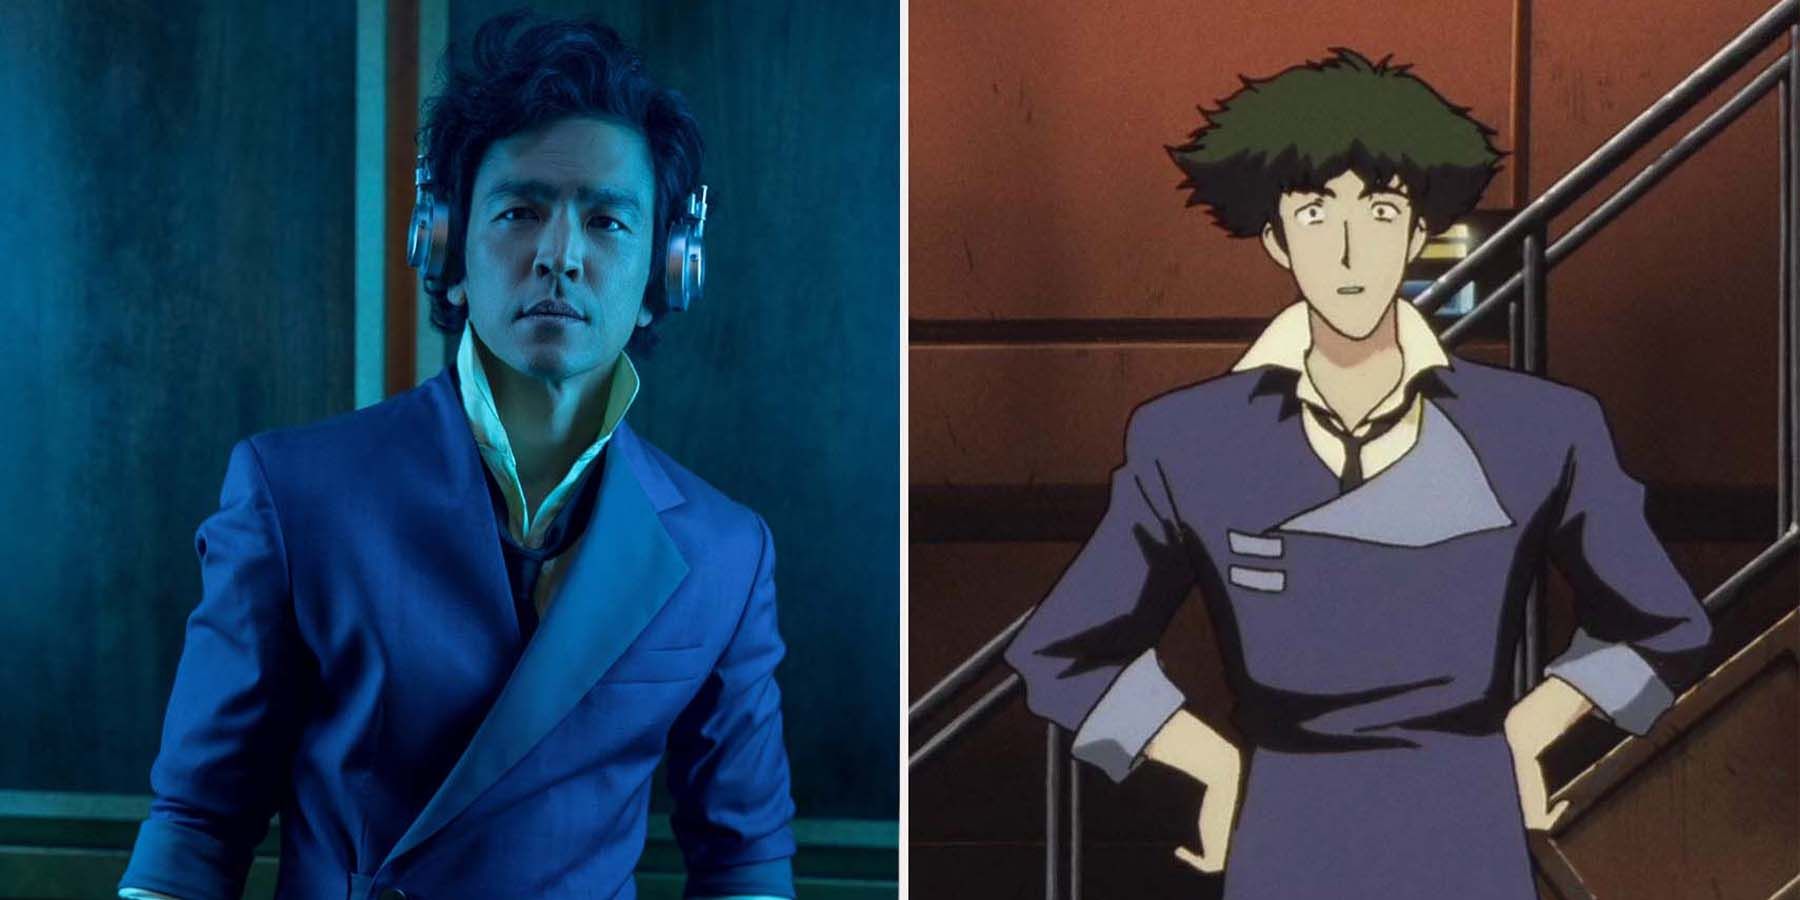 Hugely popular anime series Cowboy Bebop is getting a live-action